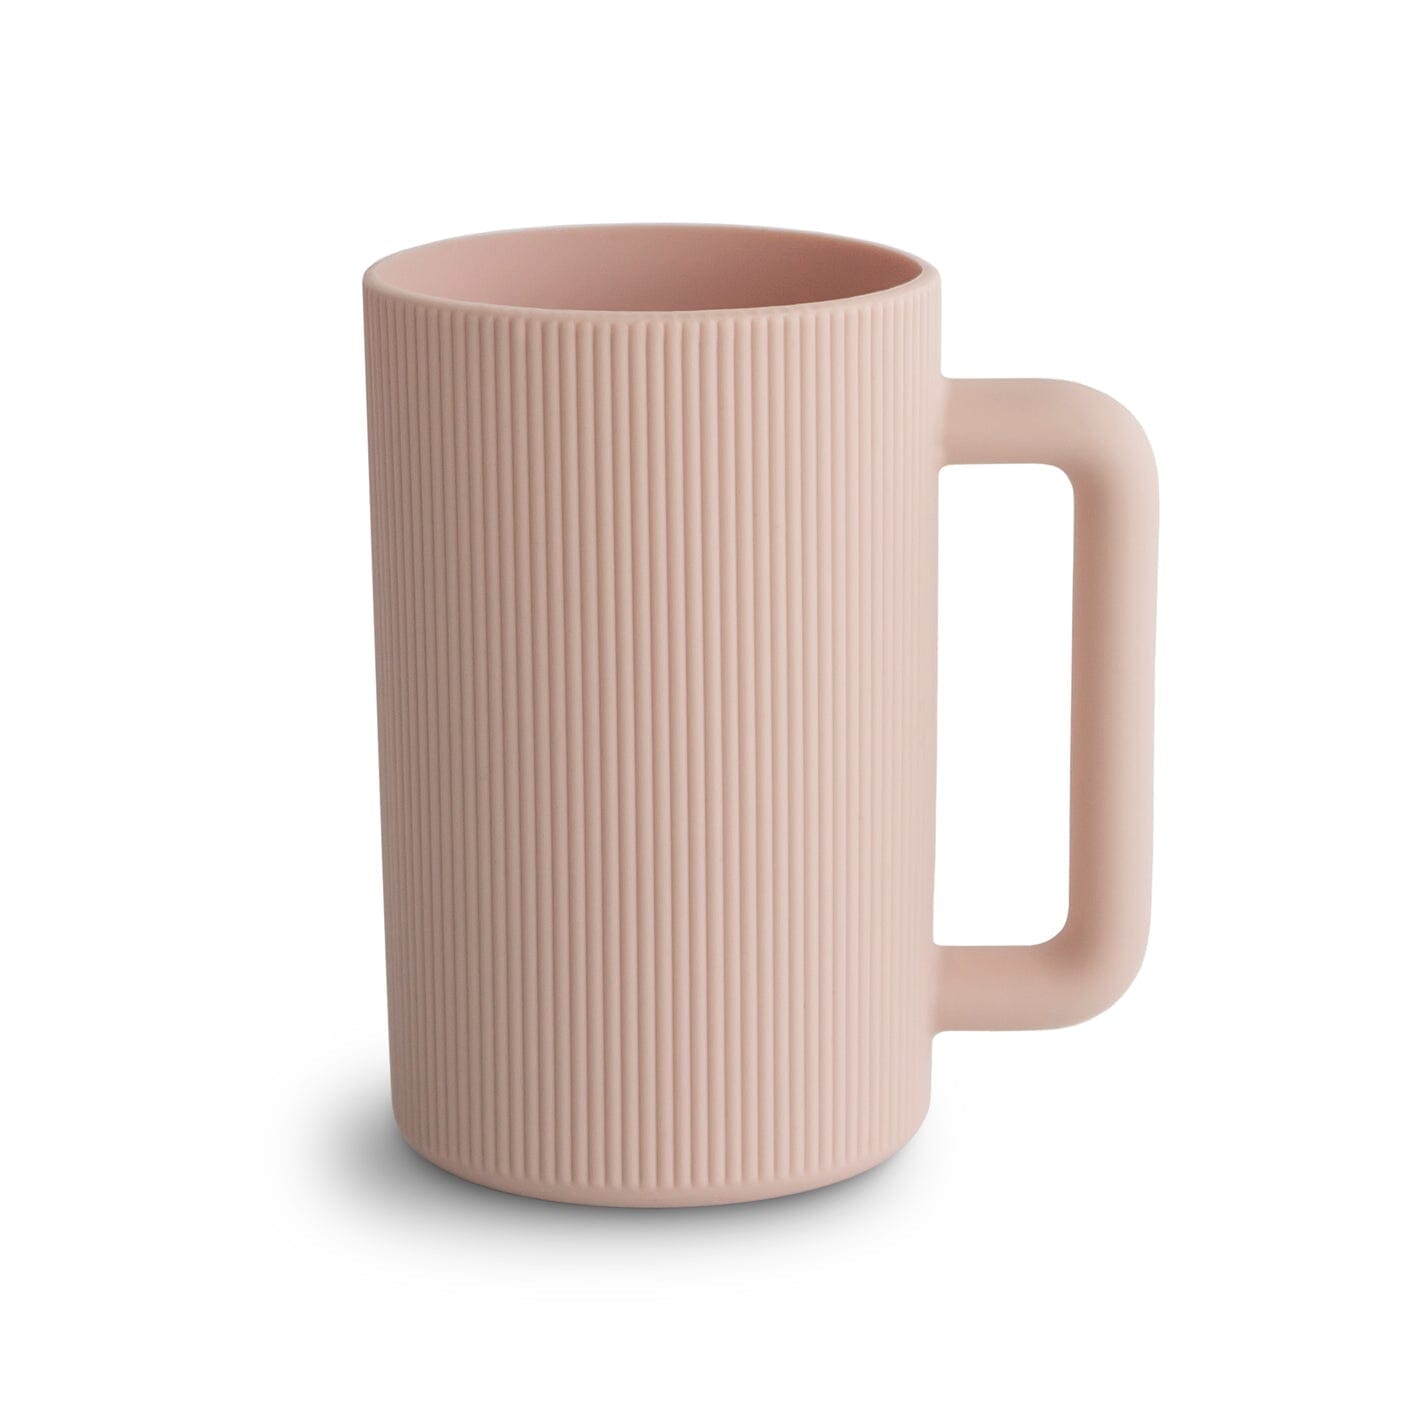 Murchison-Hume Ceramic Measuring Cup